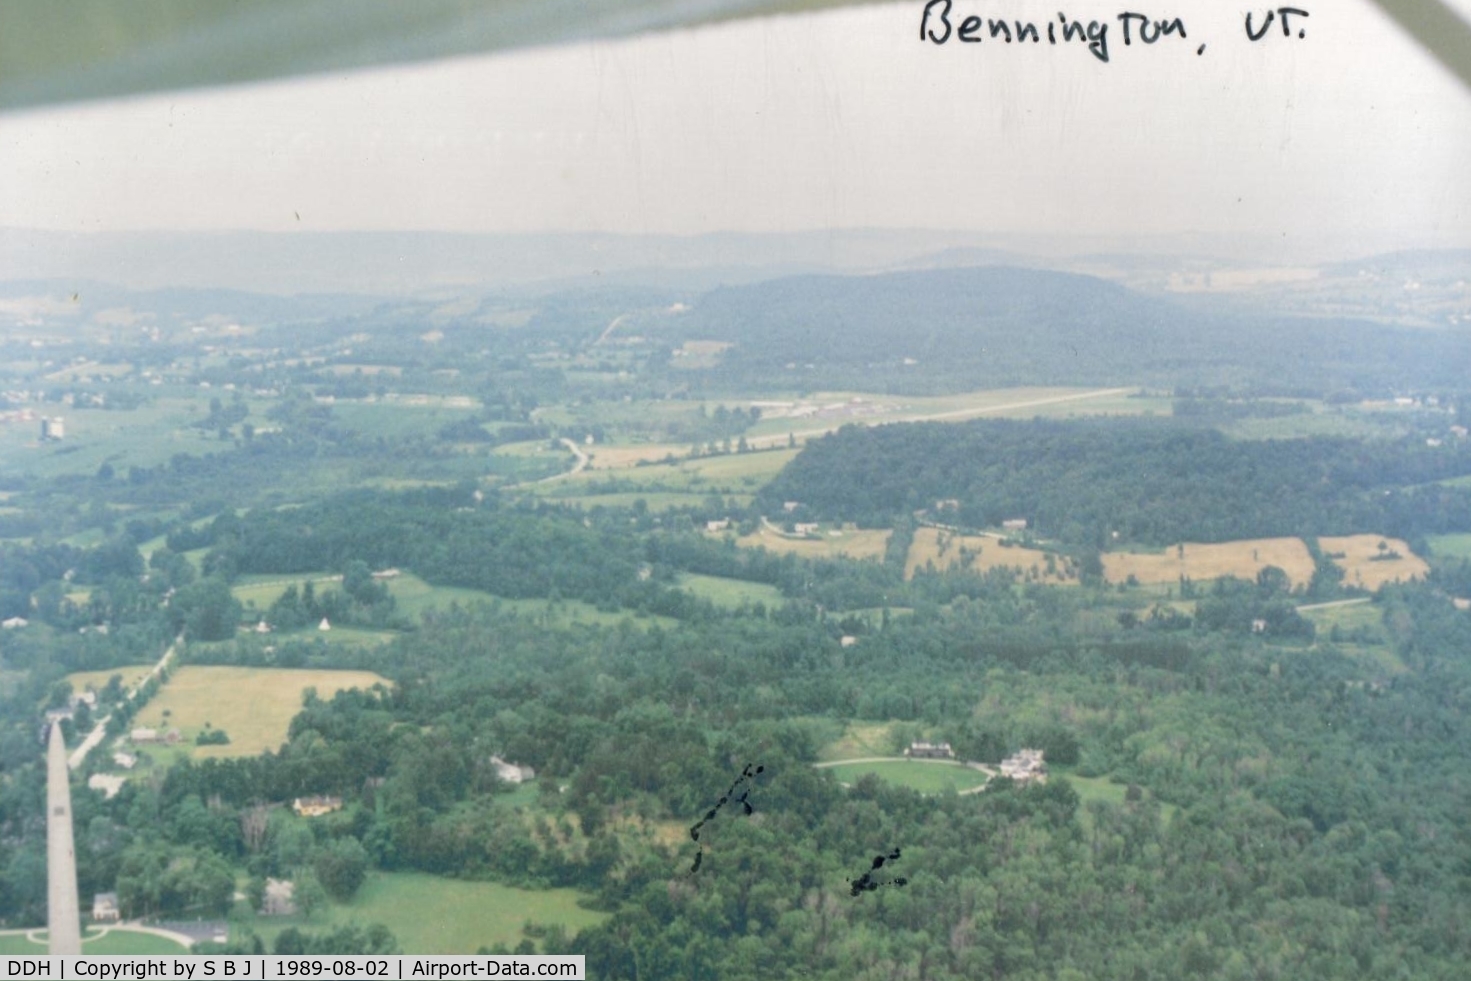 William H. Morse State Airport (DDH) - Picture taken on the 45 entry to the Bennington,Vt airport in 1989.The Bennington Battle Monument makes a great checkpoint.It is seen on the lower left.